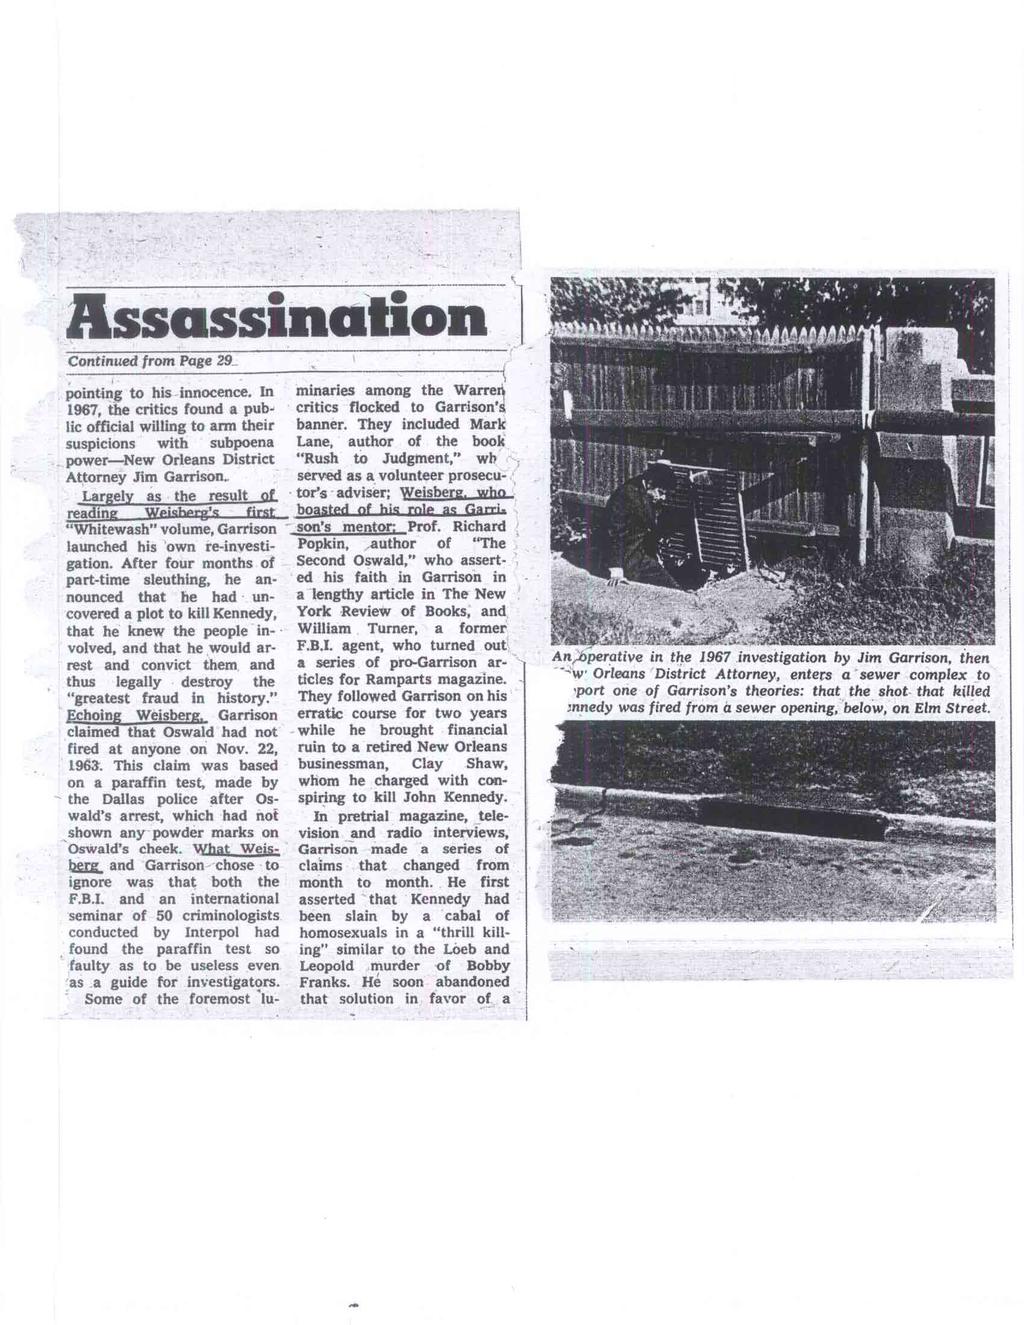 Assassination Continued from Page 29 pointing to his innocence.